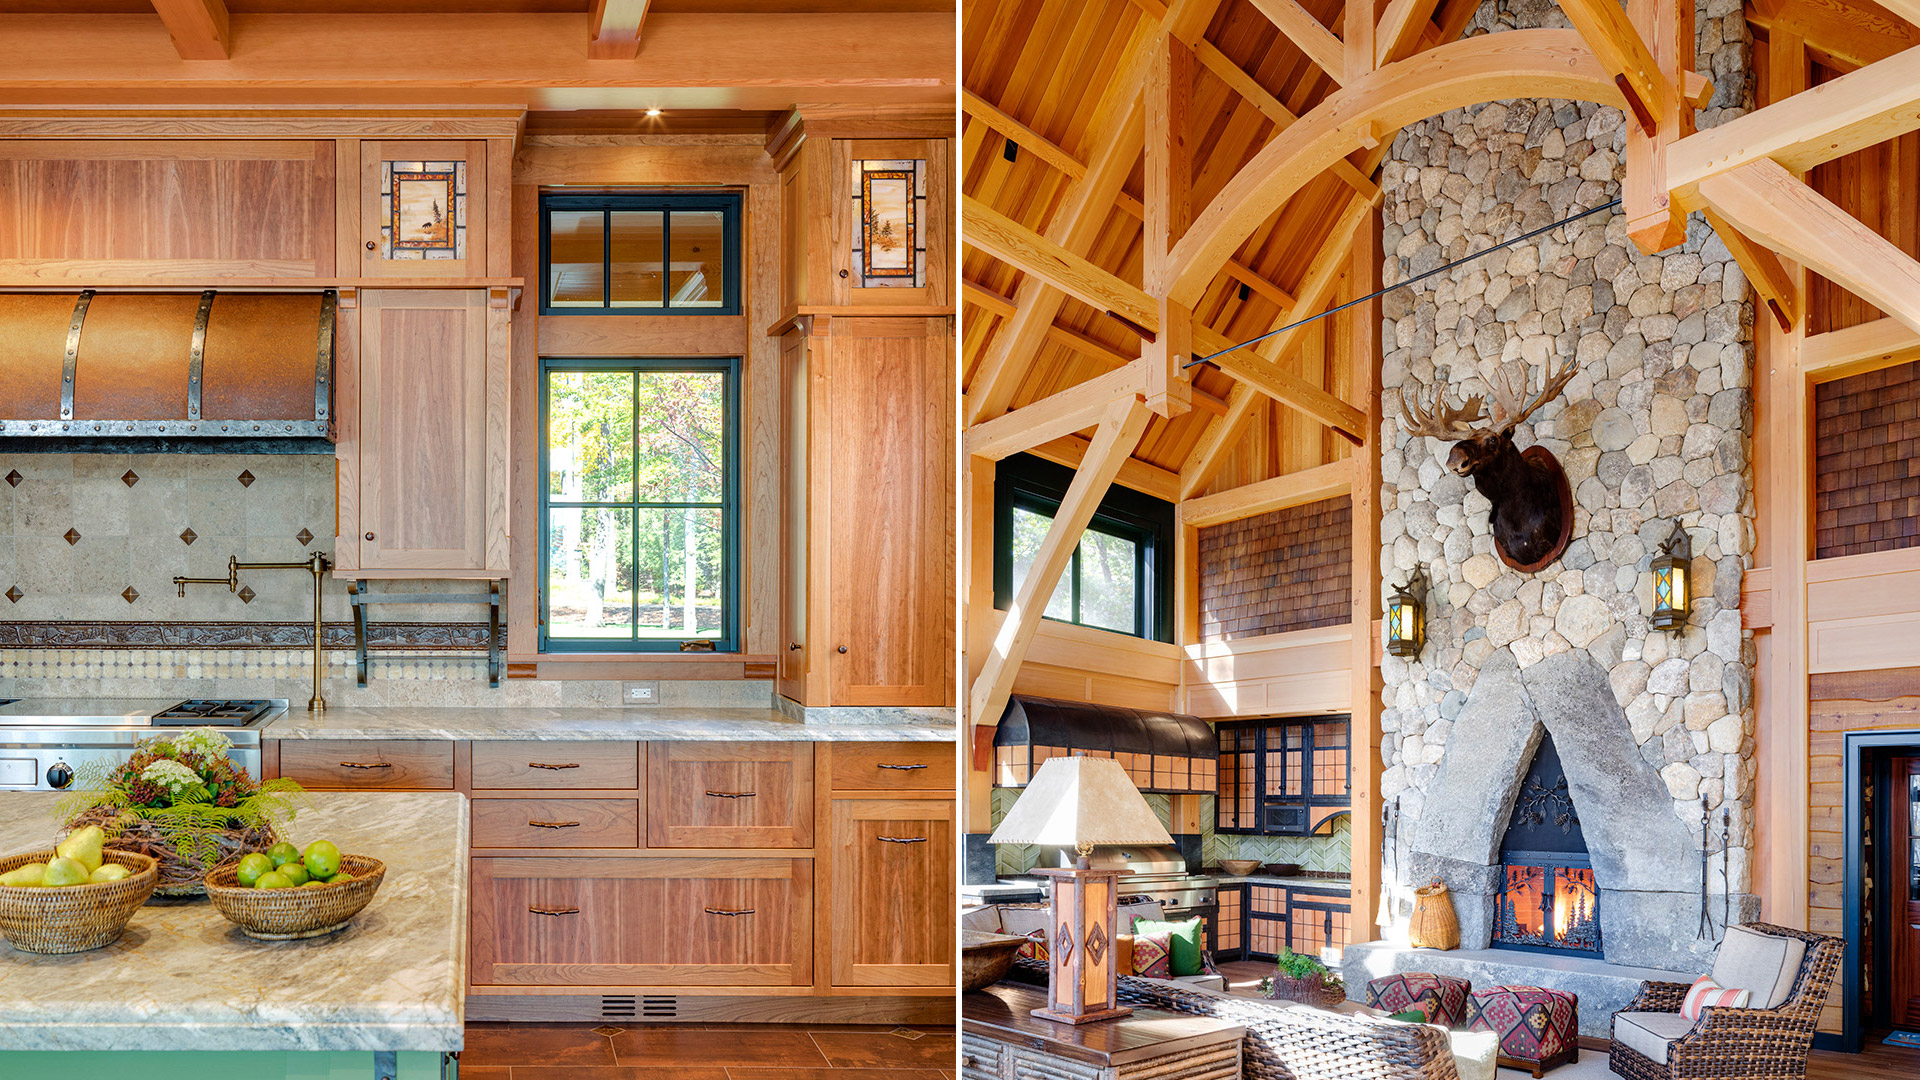 Lake Winnipesaukee, New Hampshire kitchen with custom cabinetry and screened porch with heavy timber trusses and stone fireplace